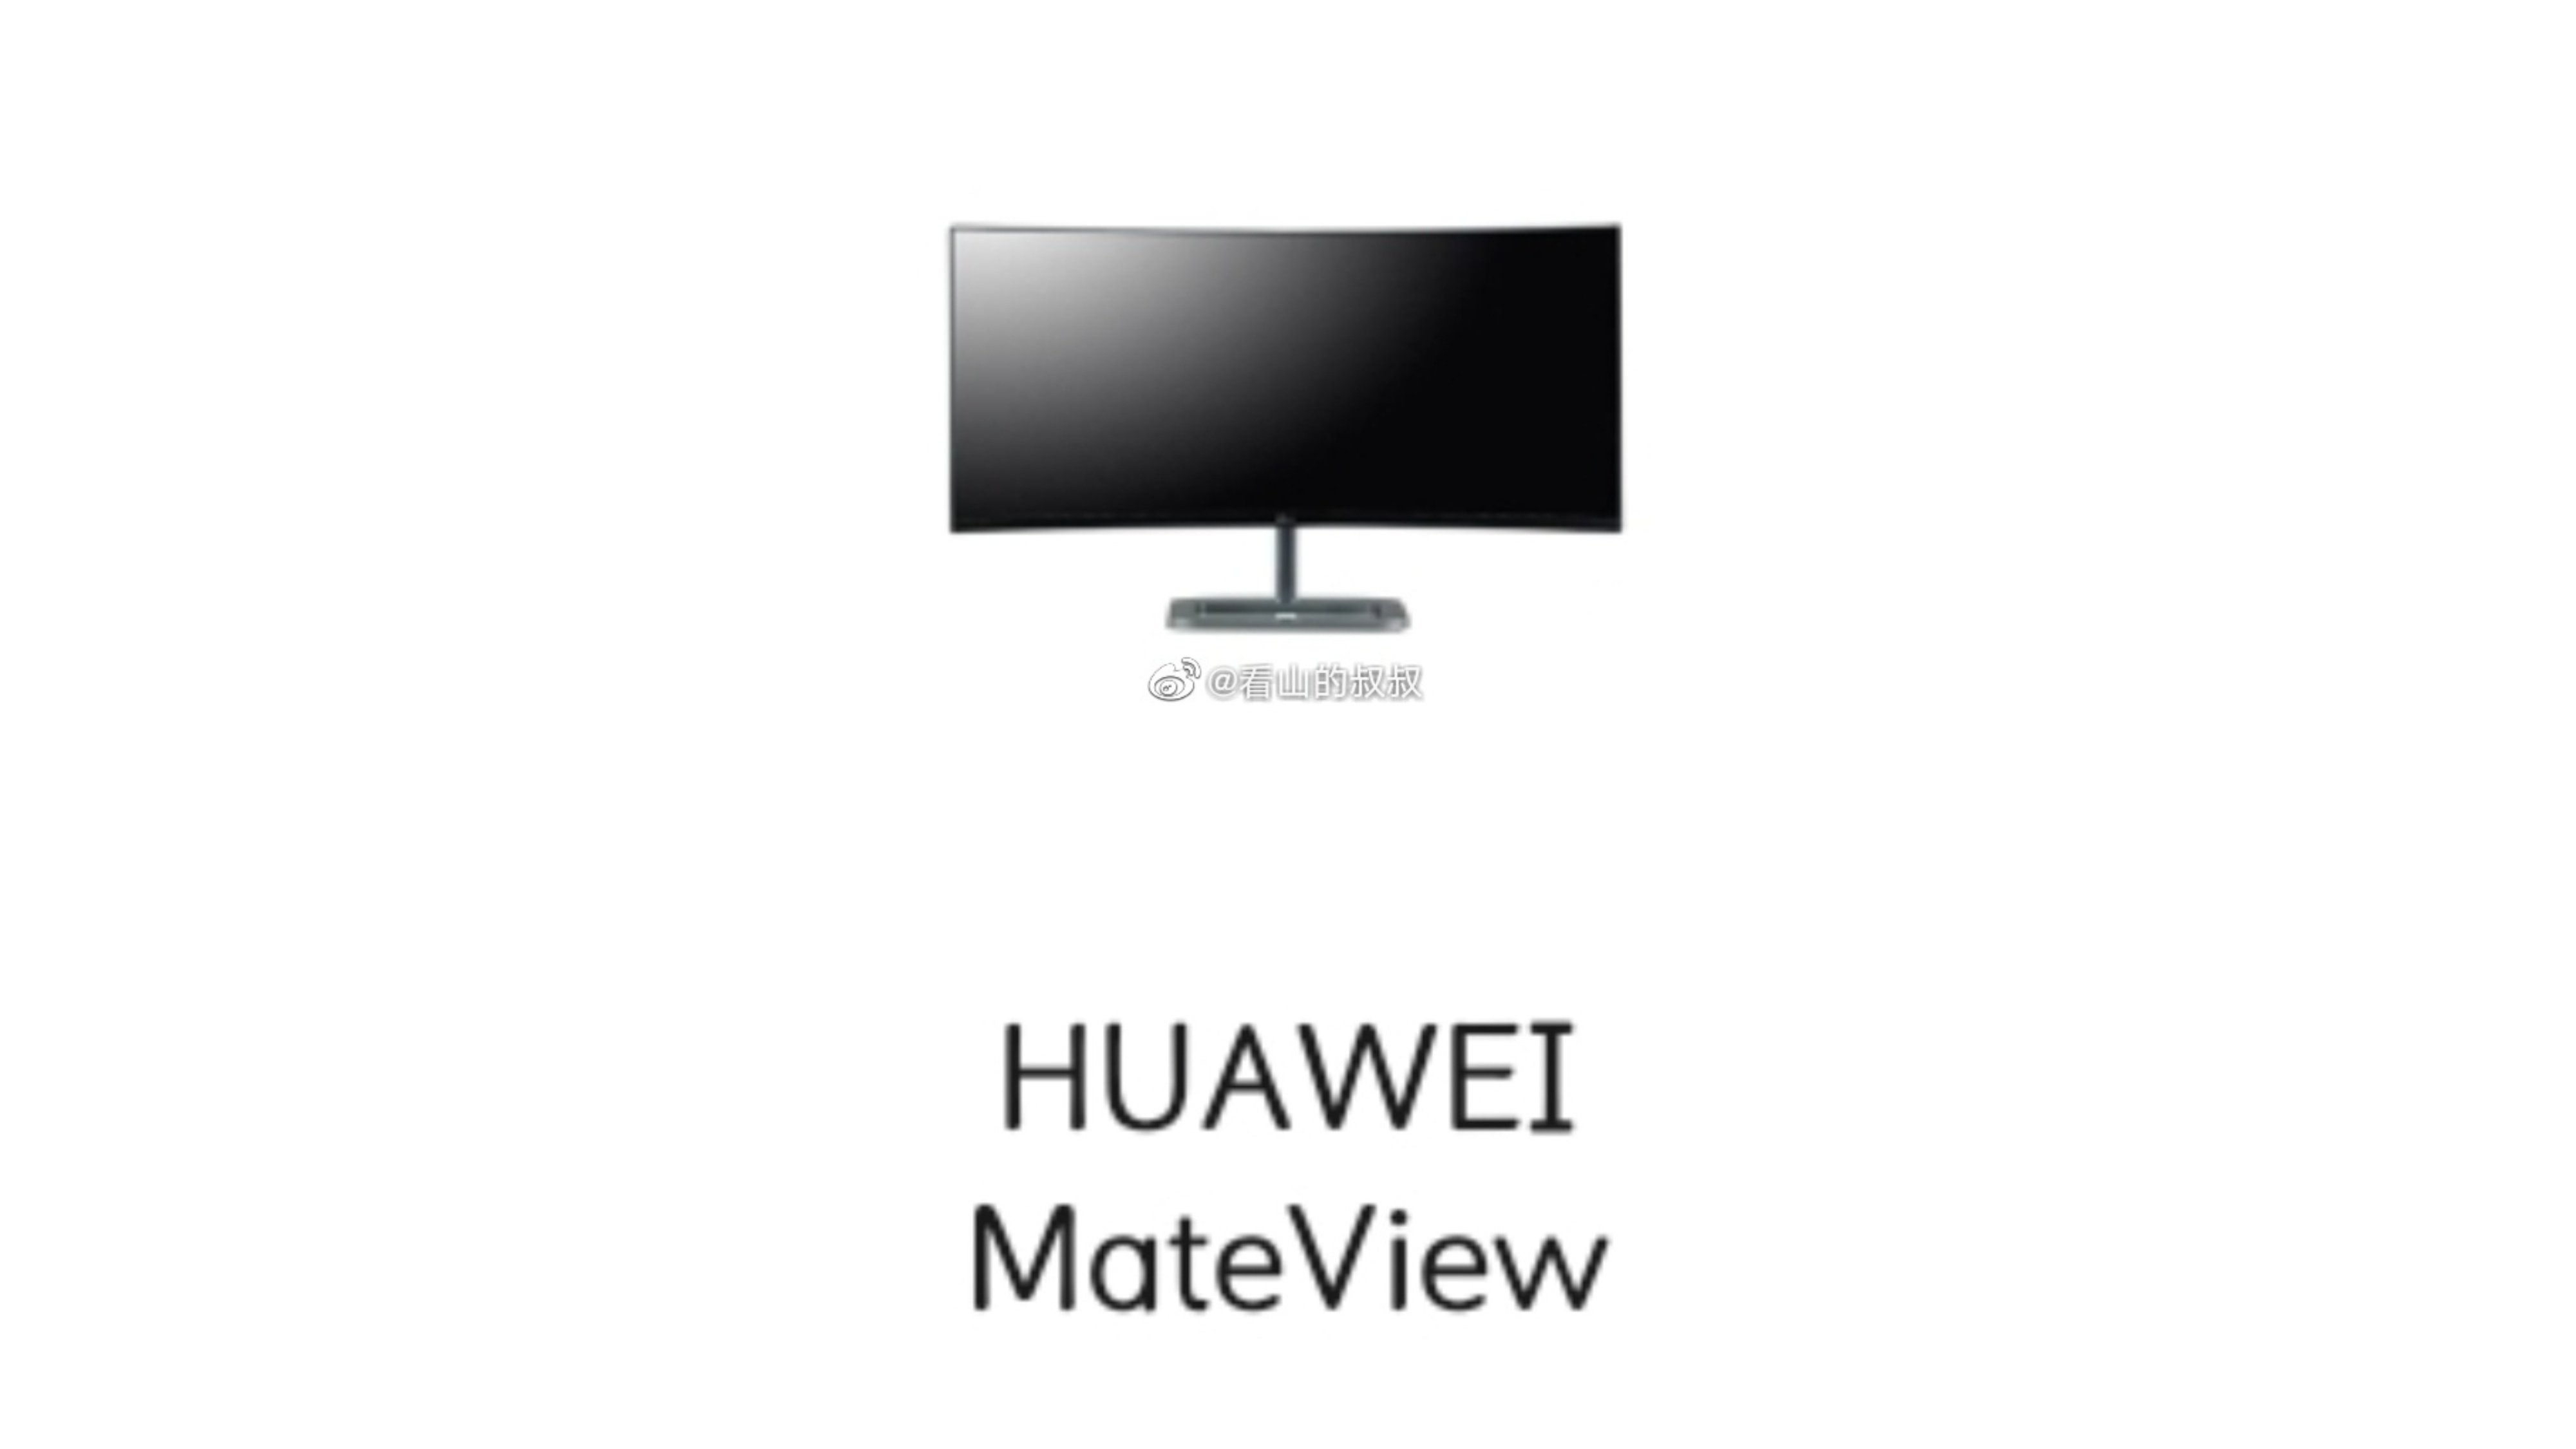 HUAWEI MateView 42-inch Curved Gaming Monitor